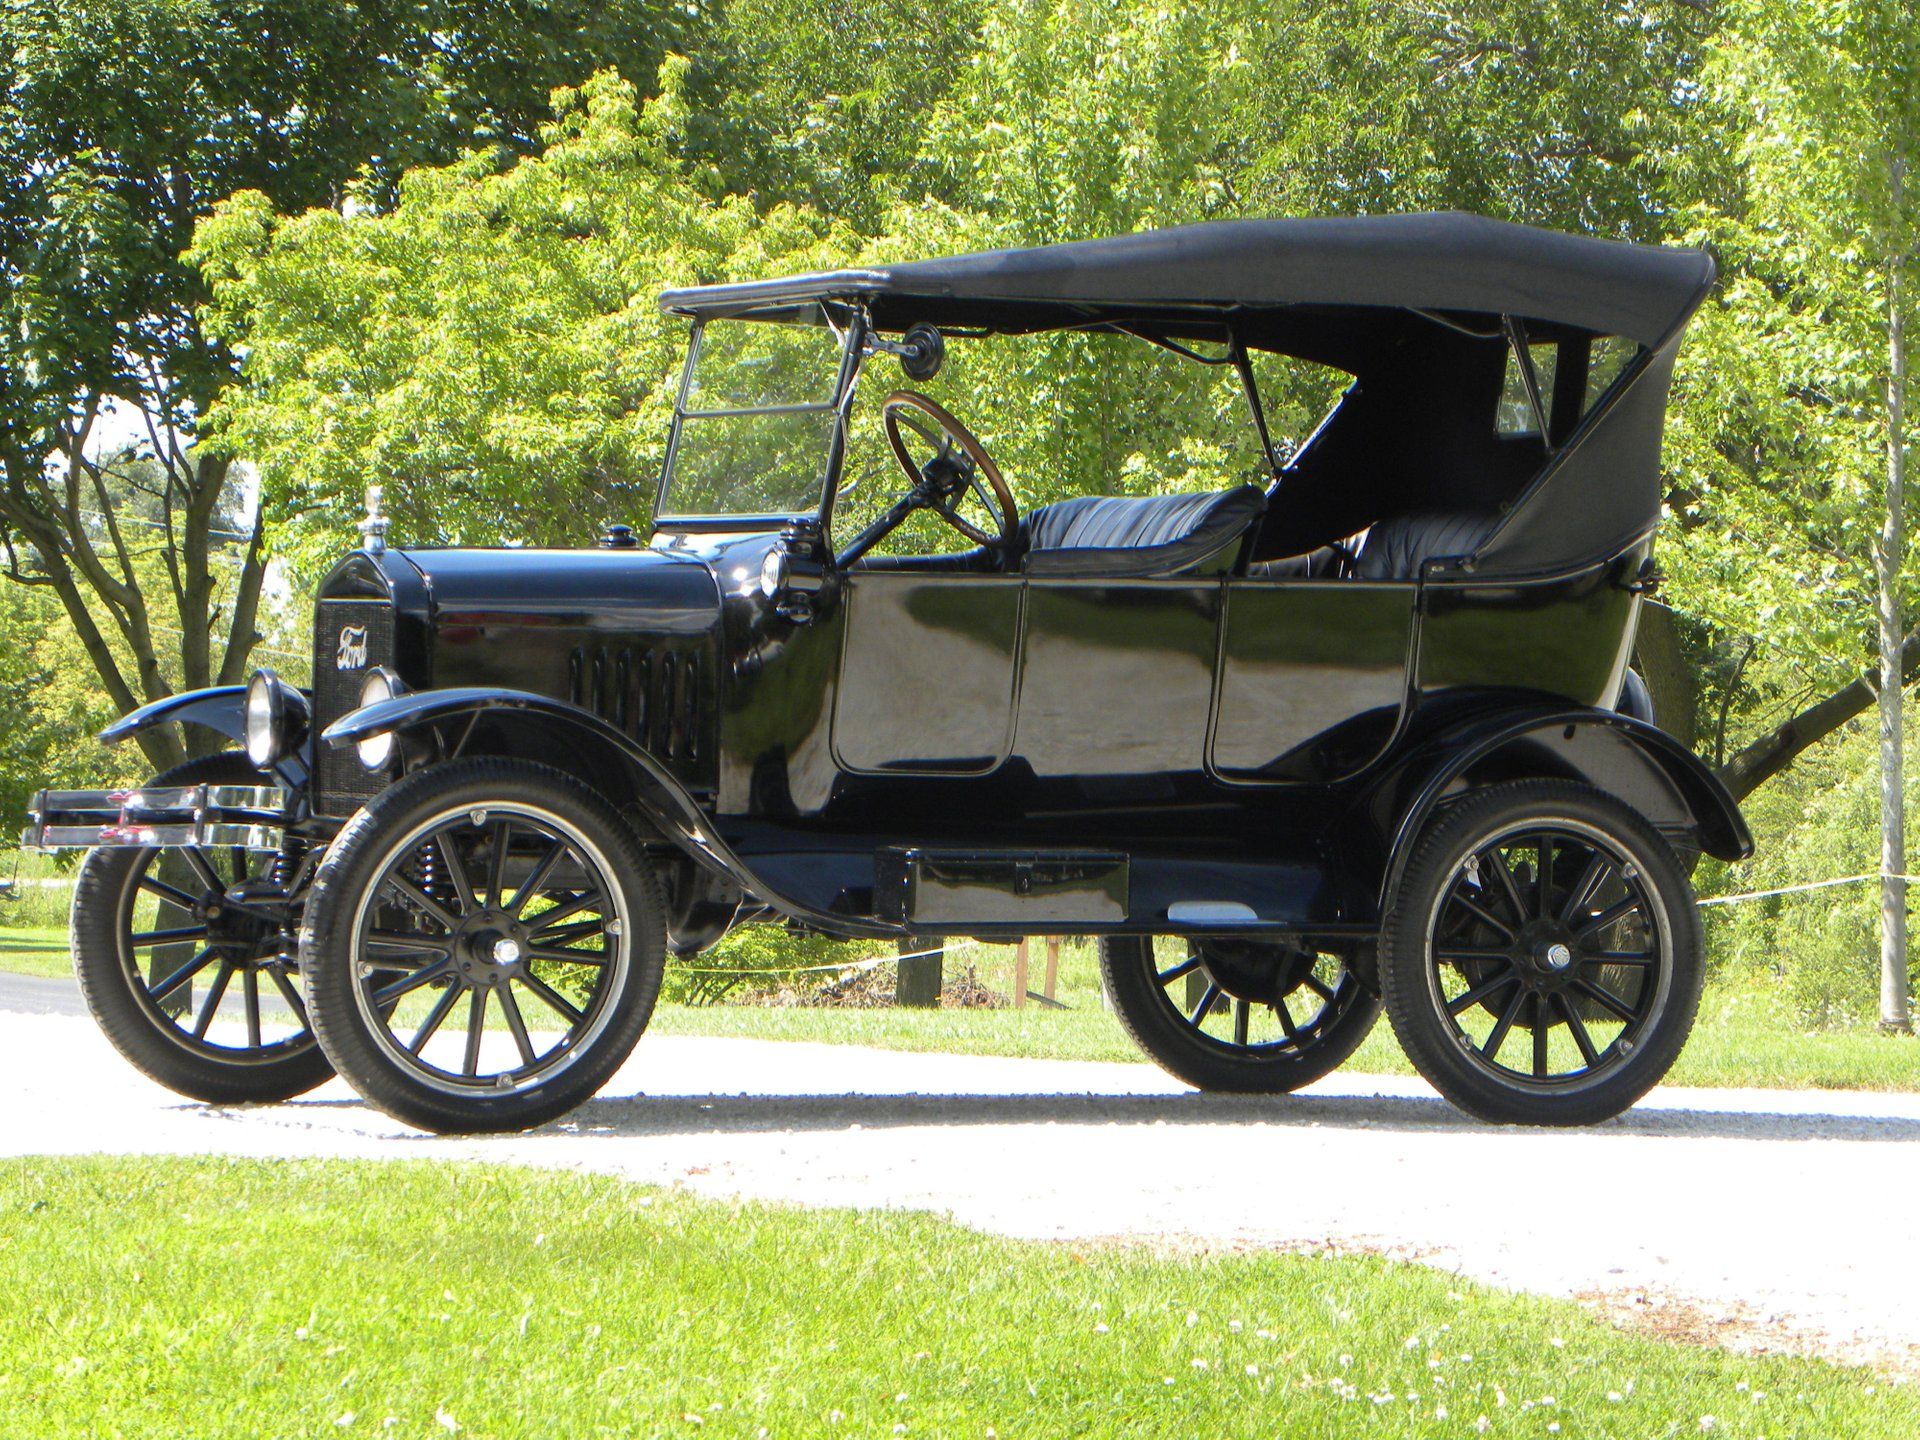 1923 Ford Model T: A discontinued car with an impressive history.